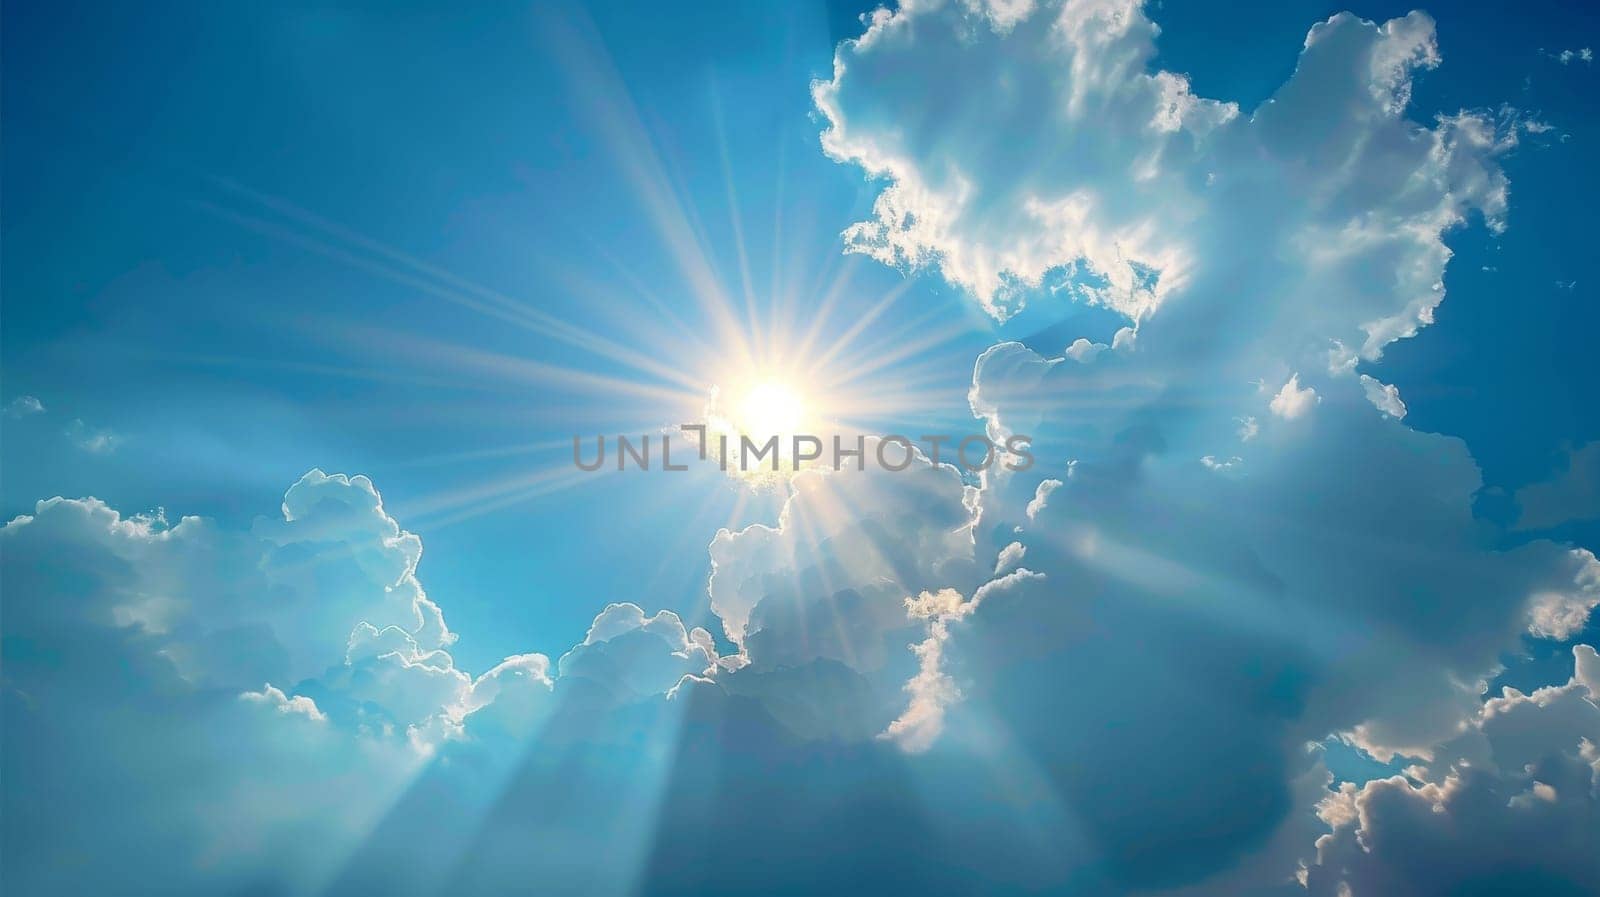 Clouds in the sky with the sun and sunlight sending out beams of light.